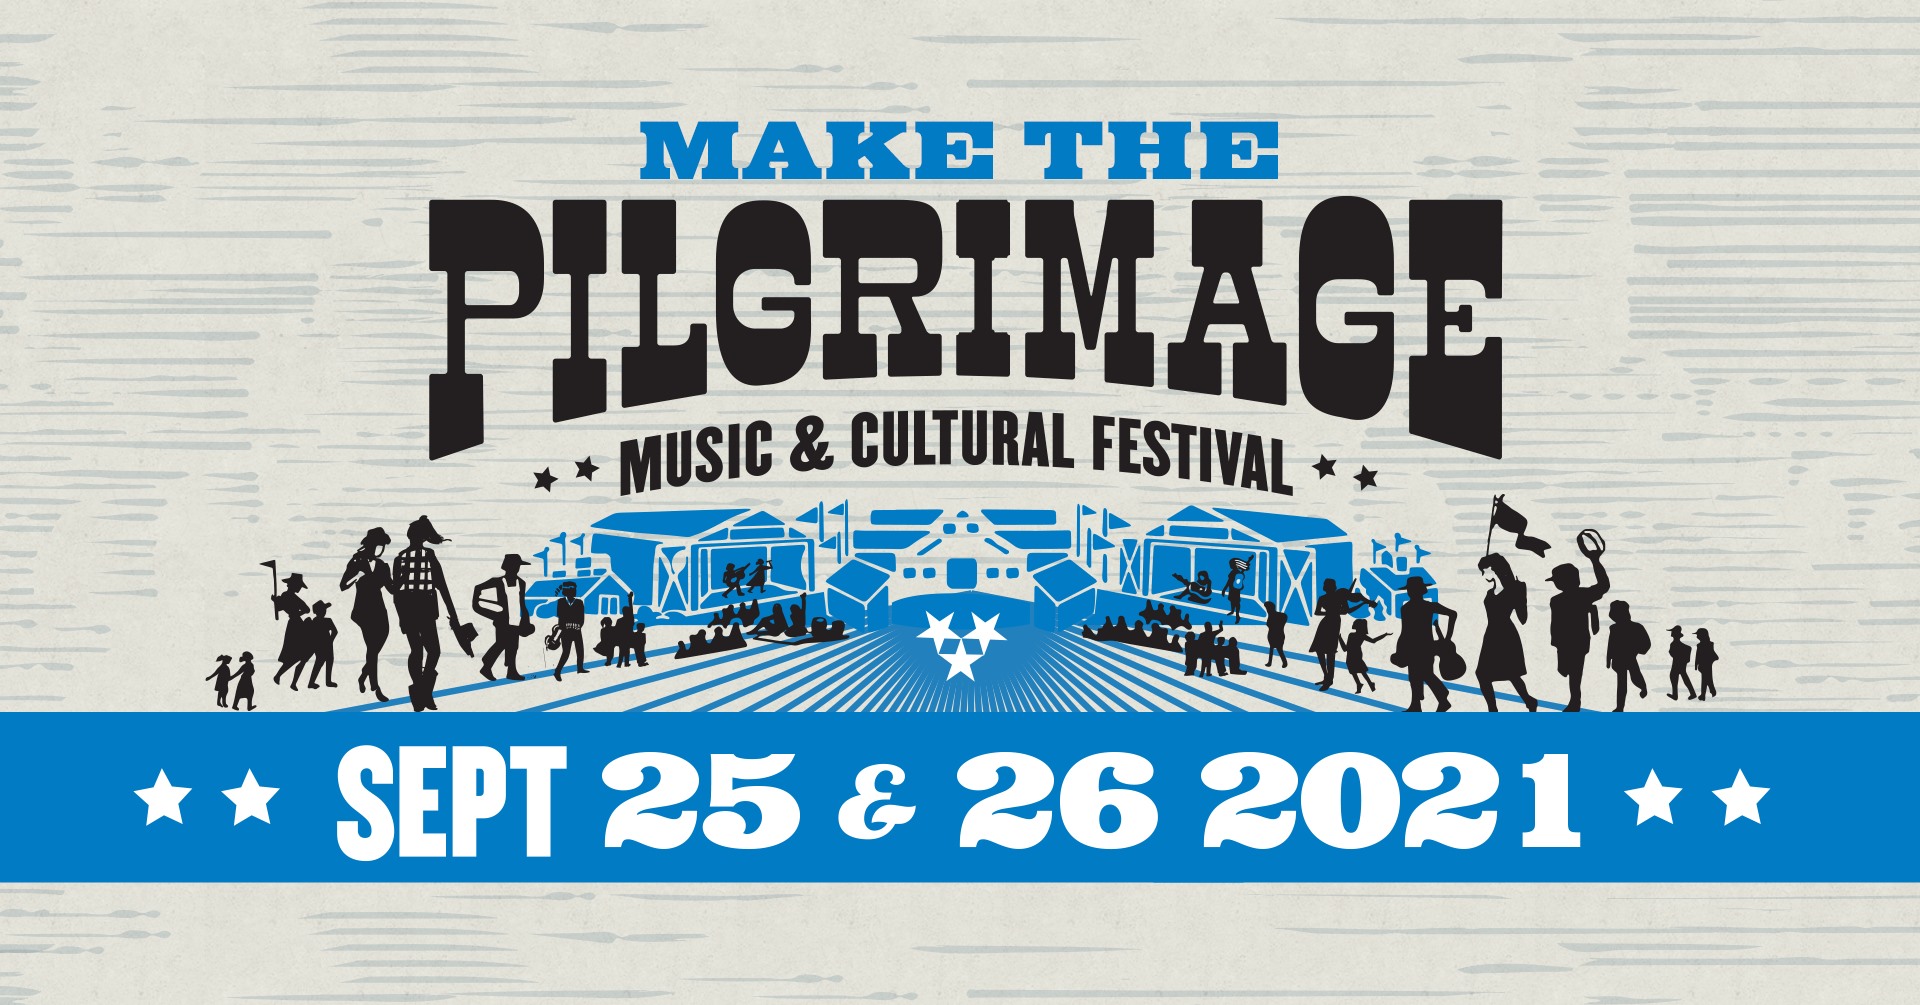 Pilgrimage Festival 2021 Lineup: Dave Matthews Band, The Black Keys, Maren Morris, Cage The Elephant and More